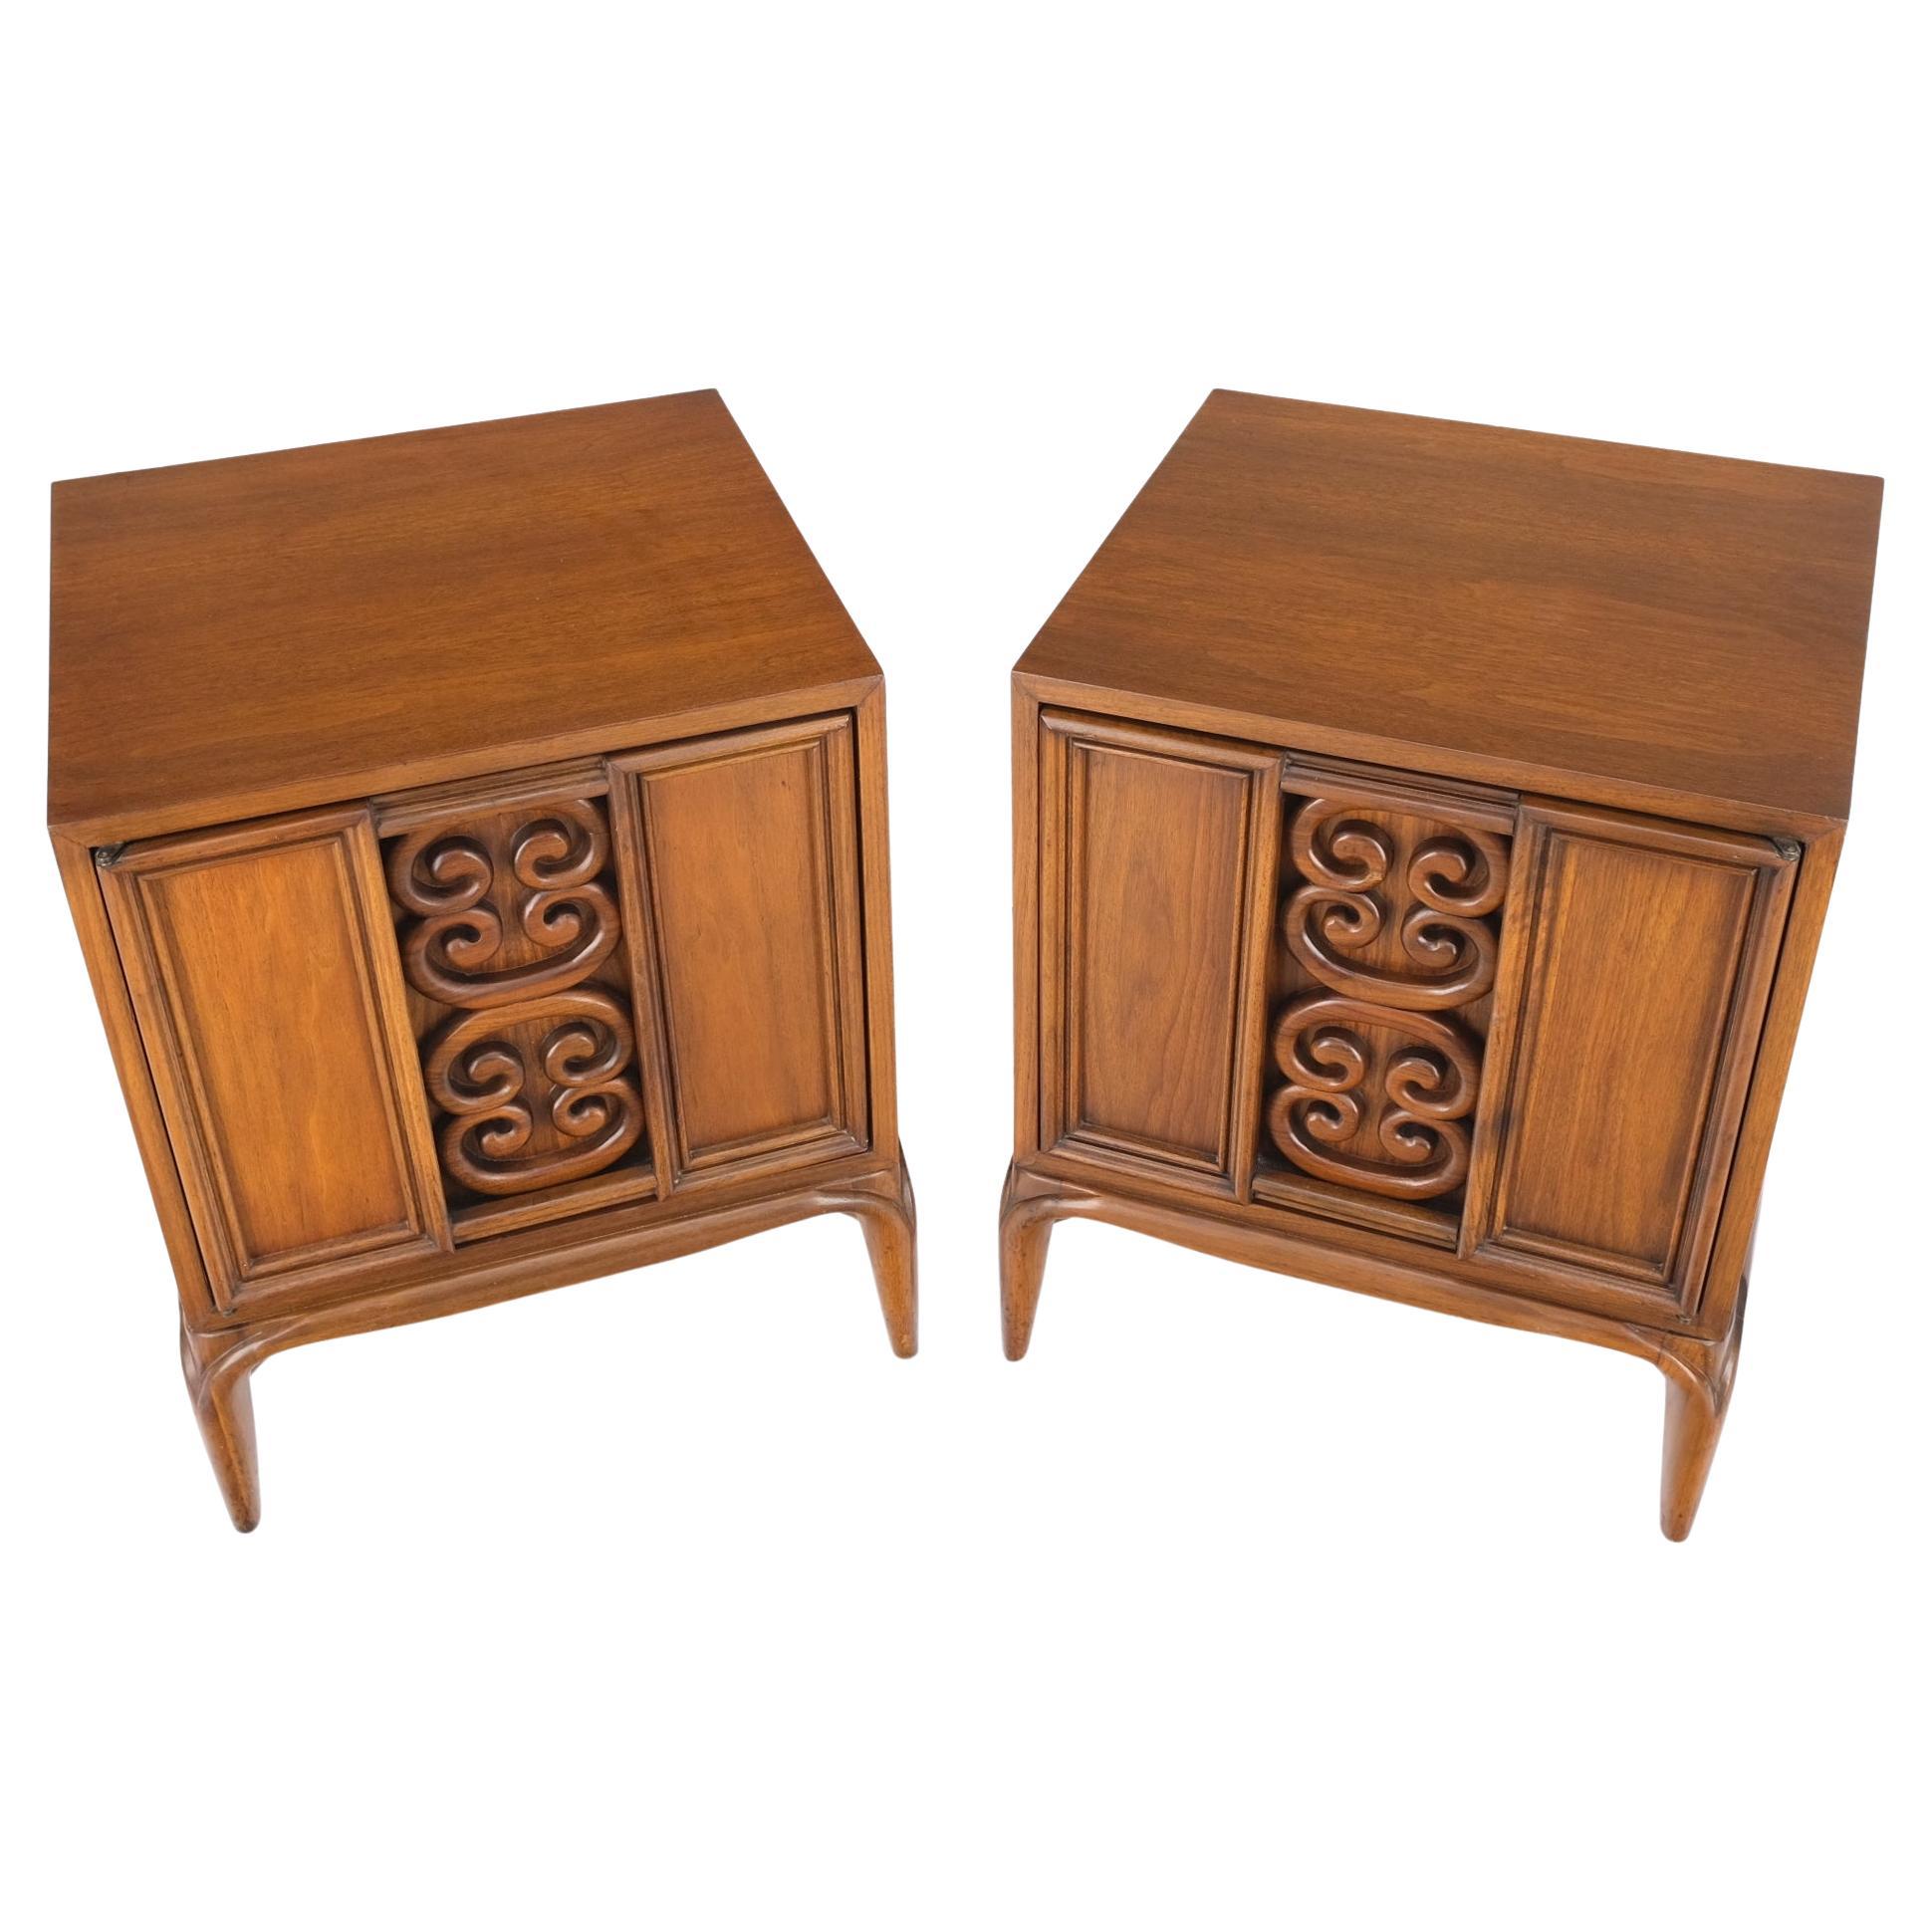 Pair of Walnut Carved Modern Ornament Front Door End Table Night Stands Mint For Sale